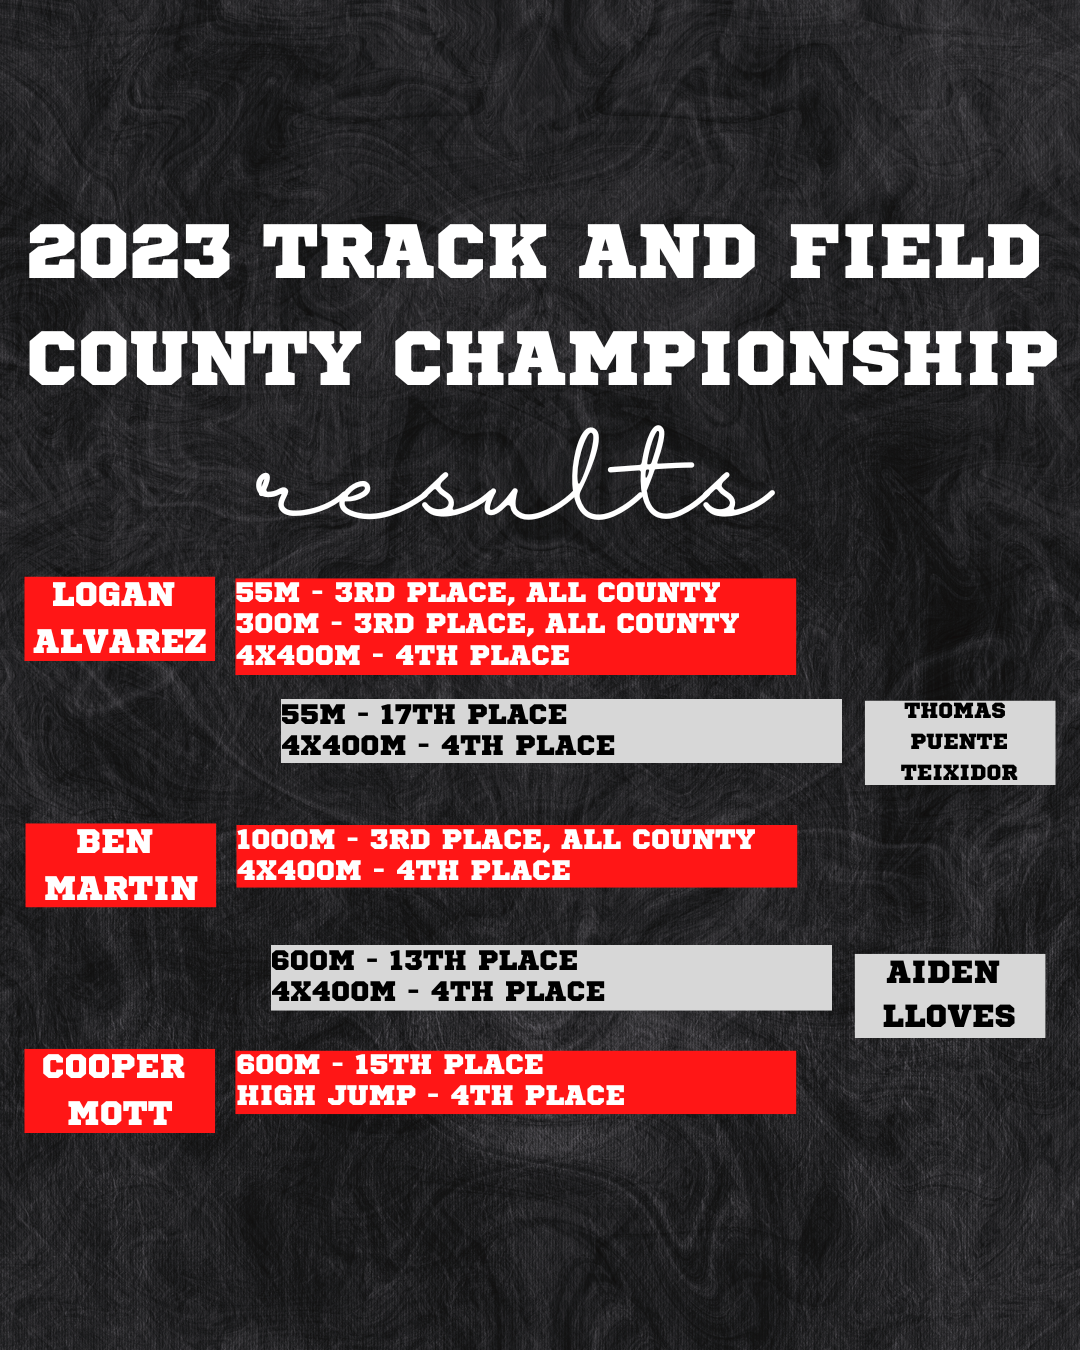 Track results